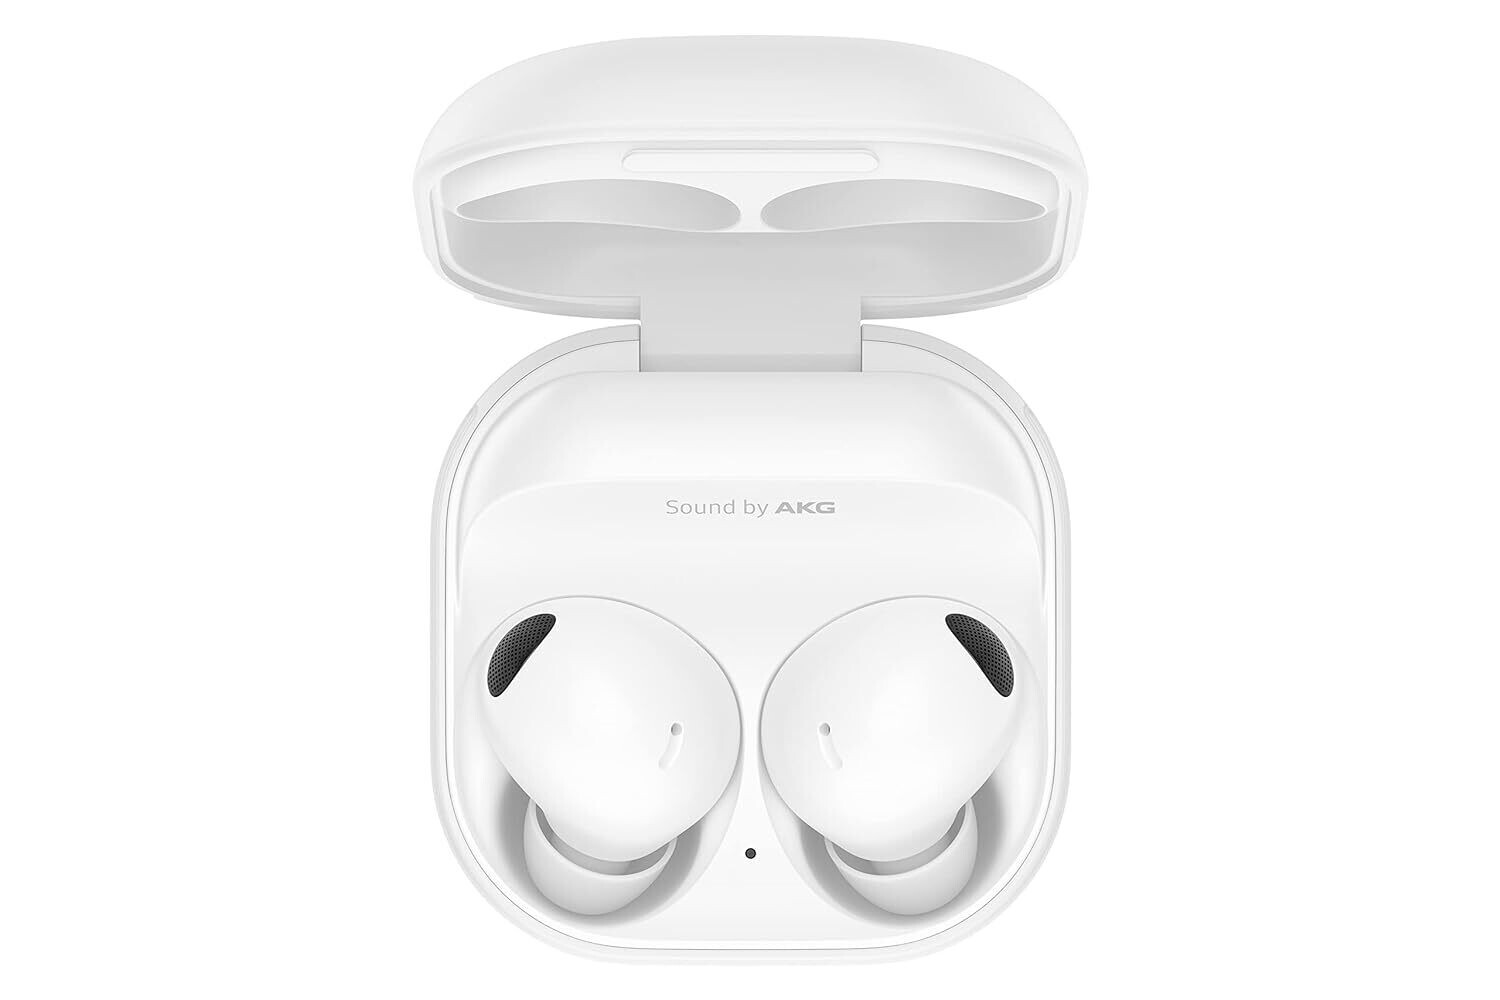 Samsung Galaxy Buds2 Pro with Mic Noise Cancellation White